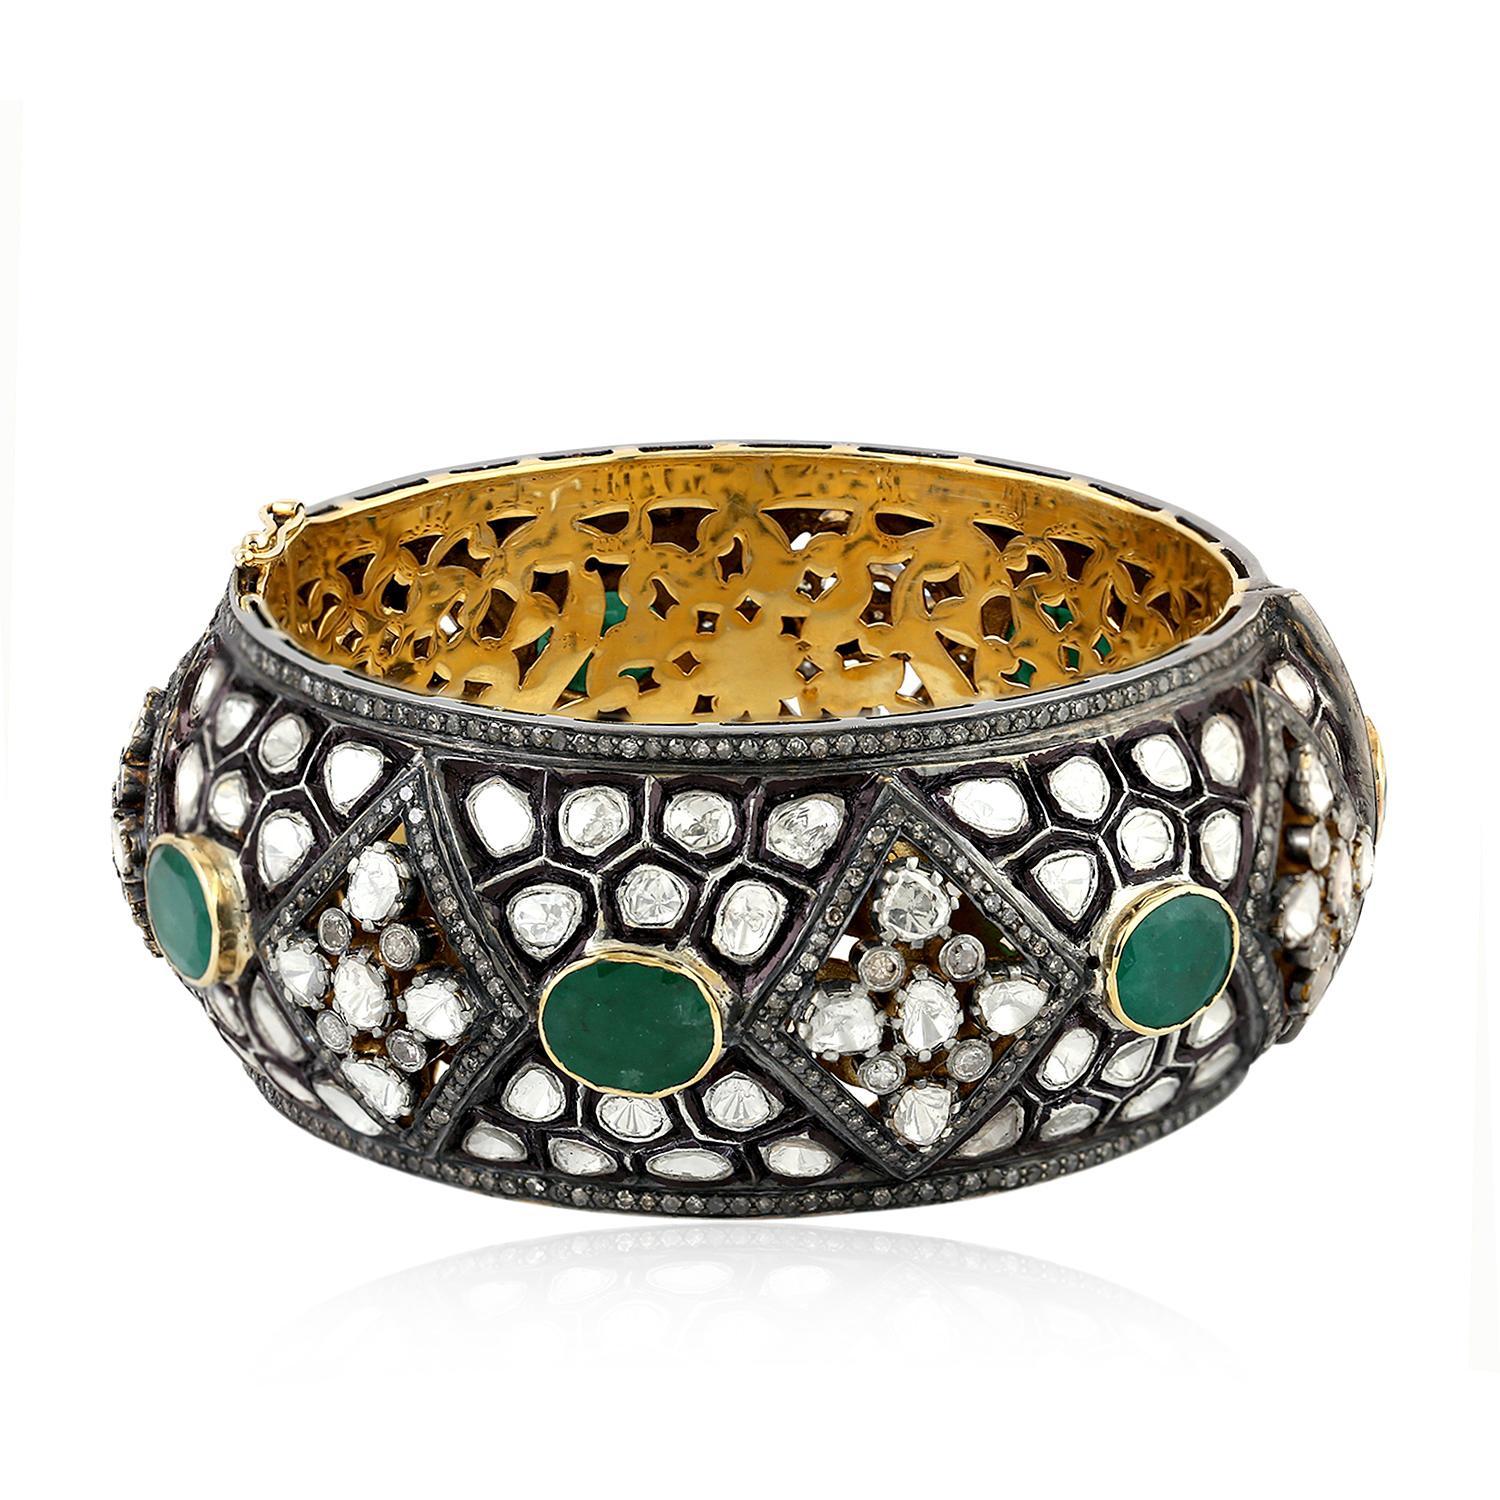 Art Deco Emerald & Rose Cut Diamonds Bangle with Carved Grill Made in 14k Gold & Silver For Sale